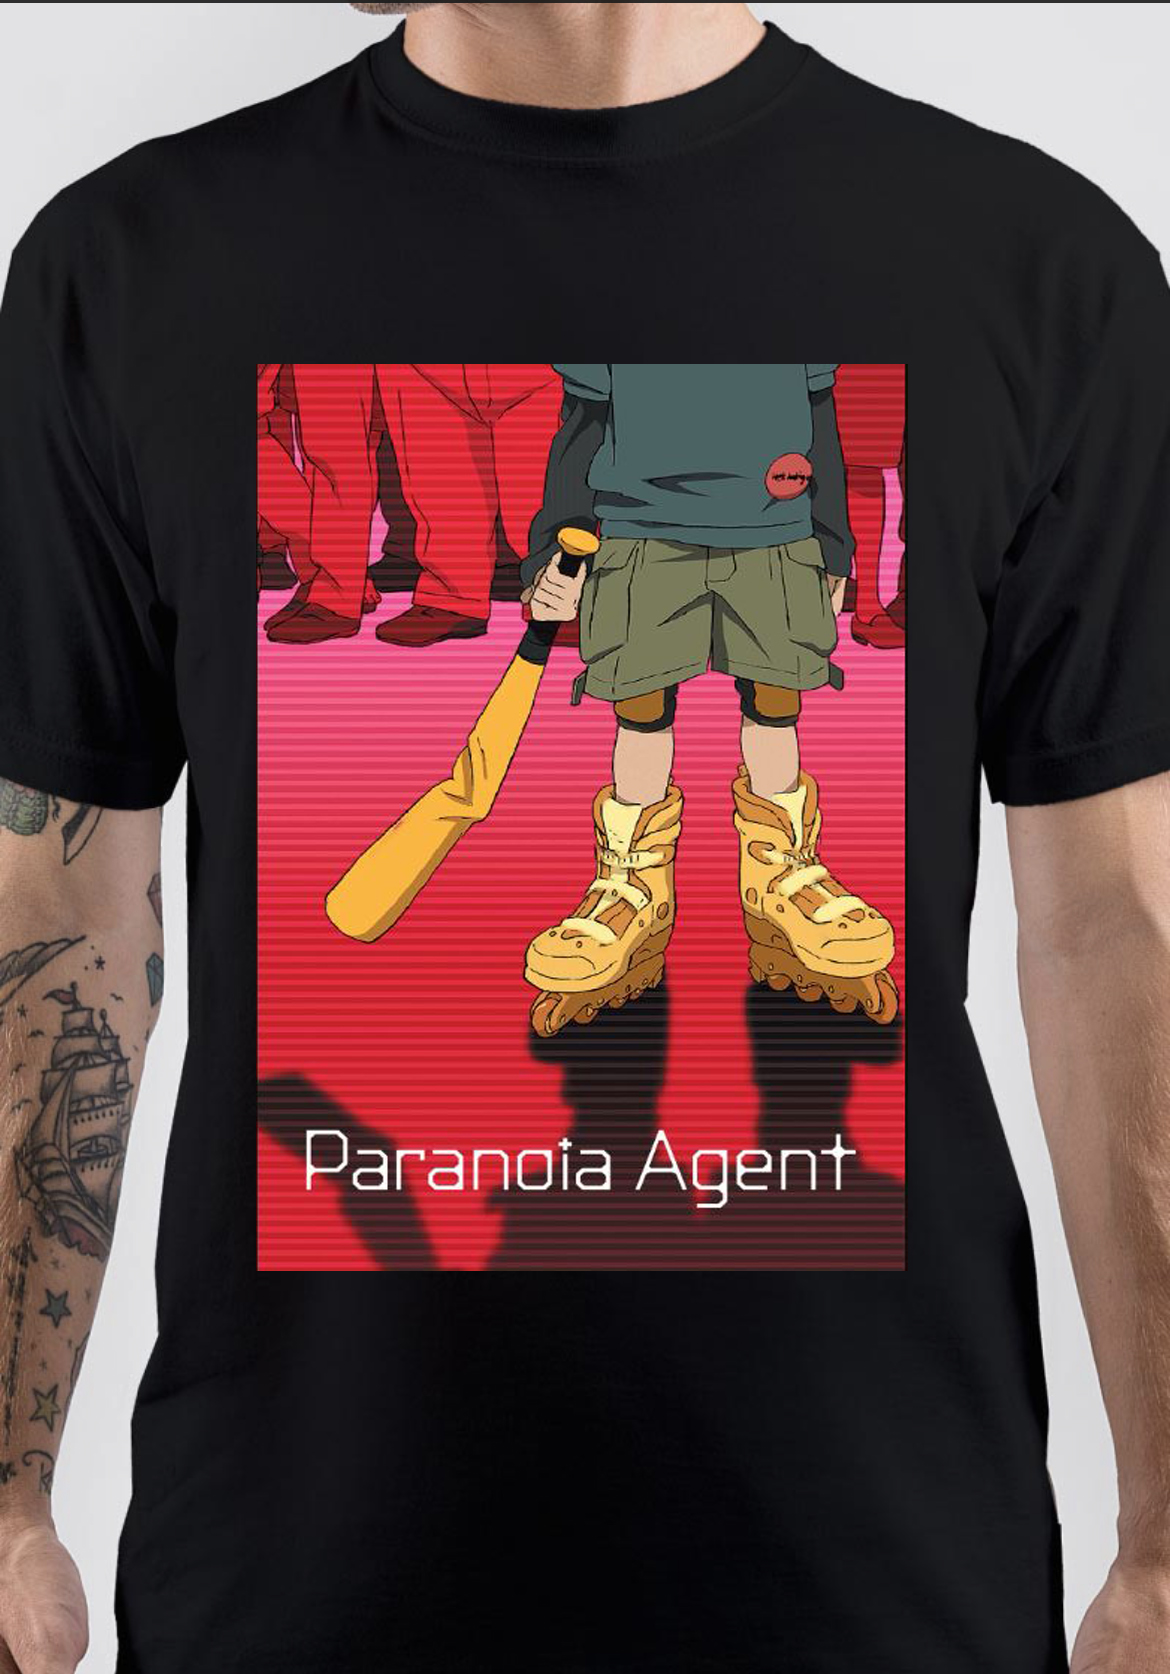 Review of Paranoia Agent